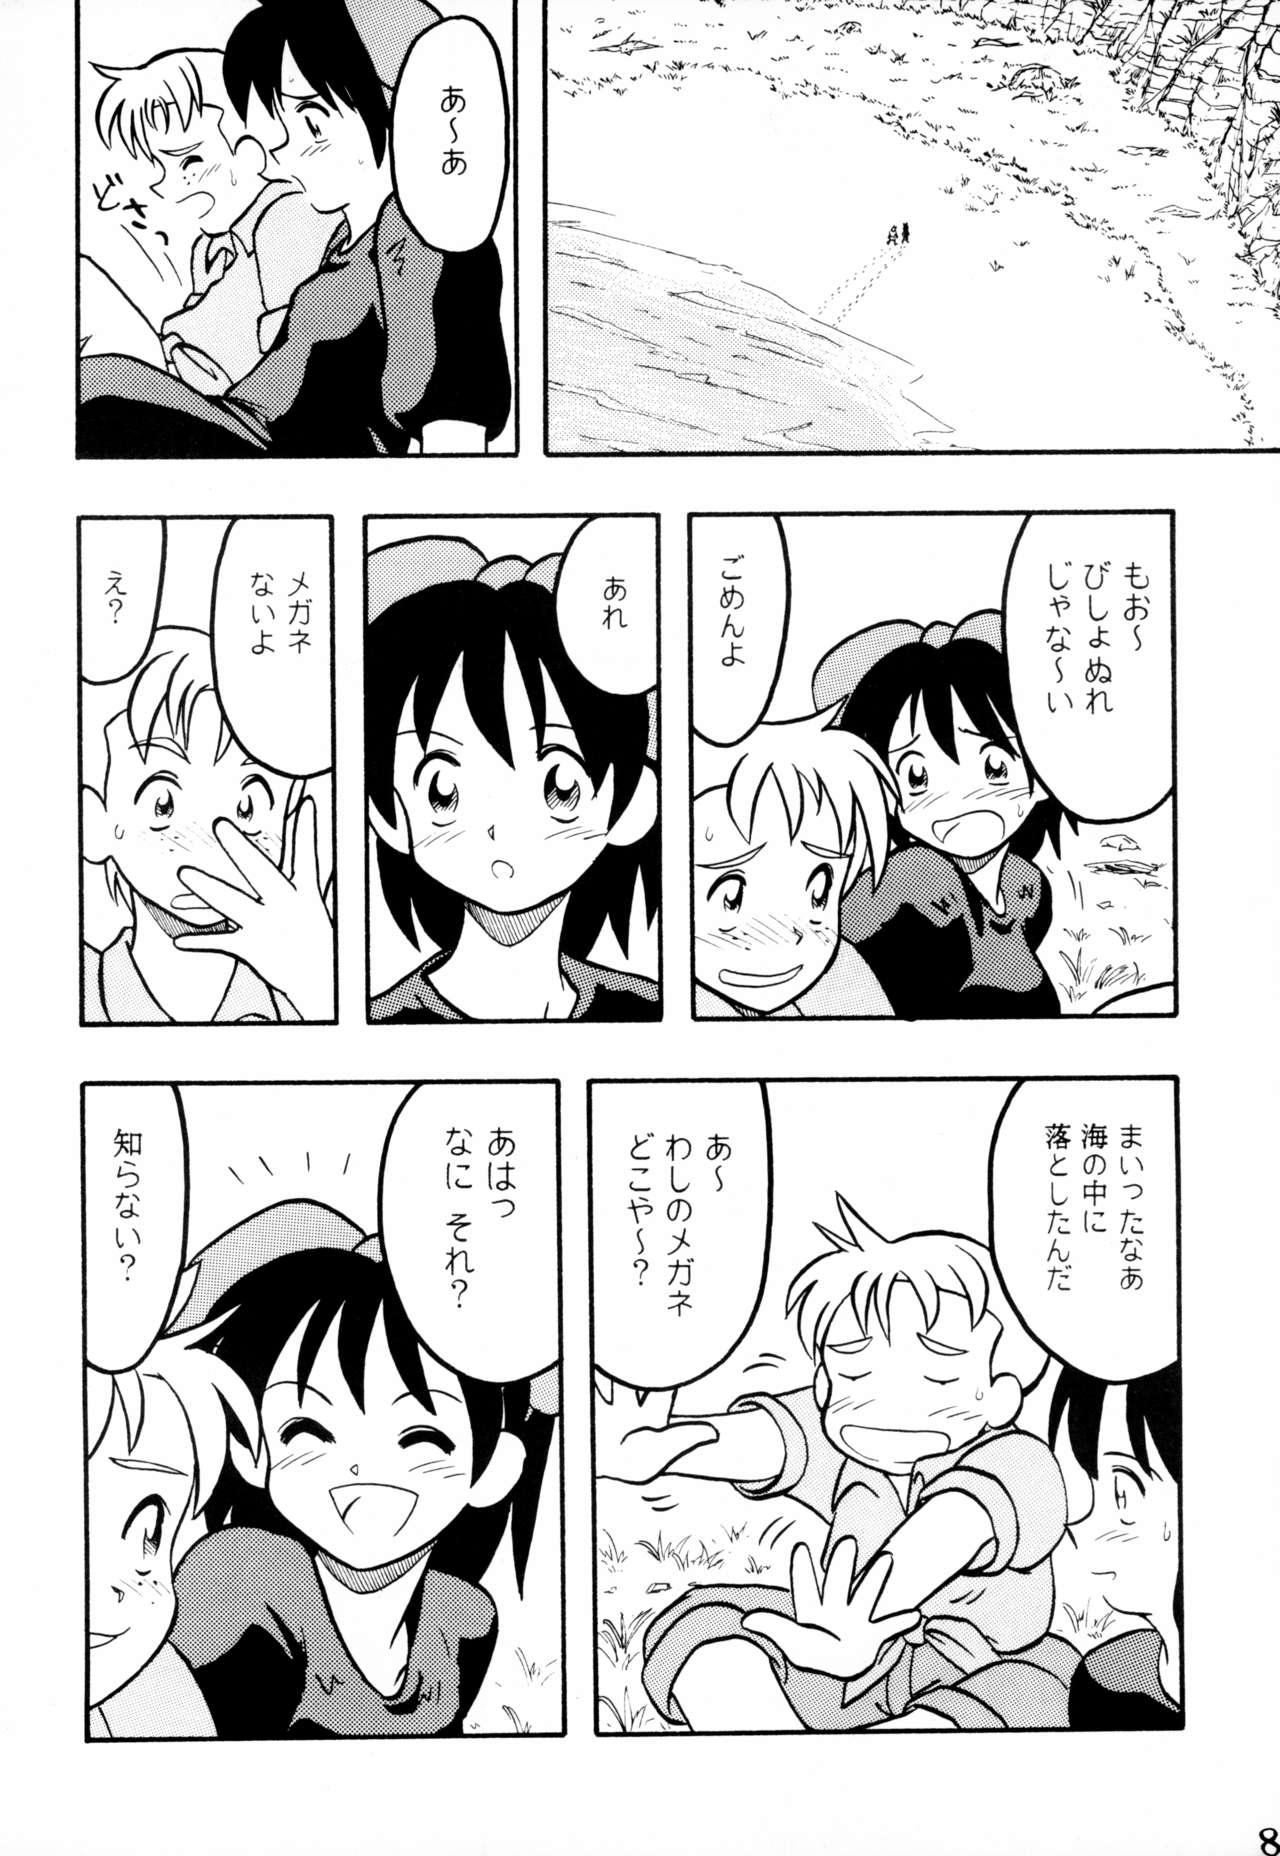 Awesome STRANDED - Kikis delivery service | majo no takkyuubin Stretching - Page 8